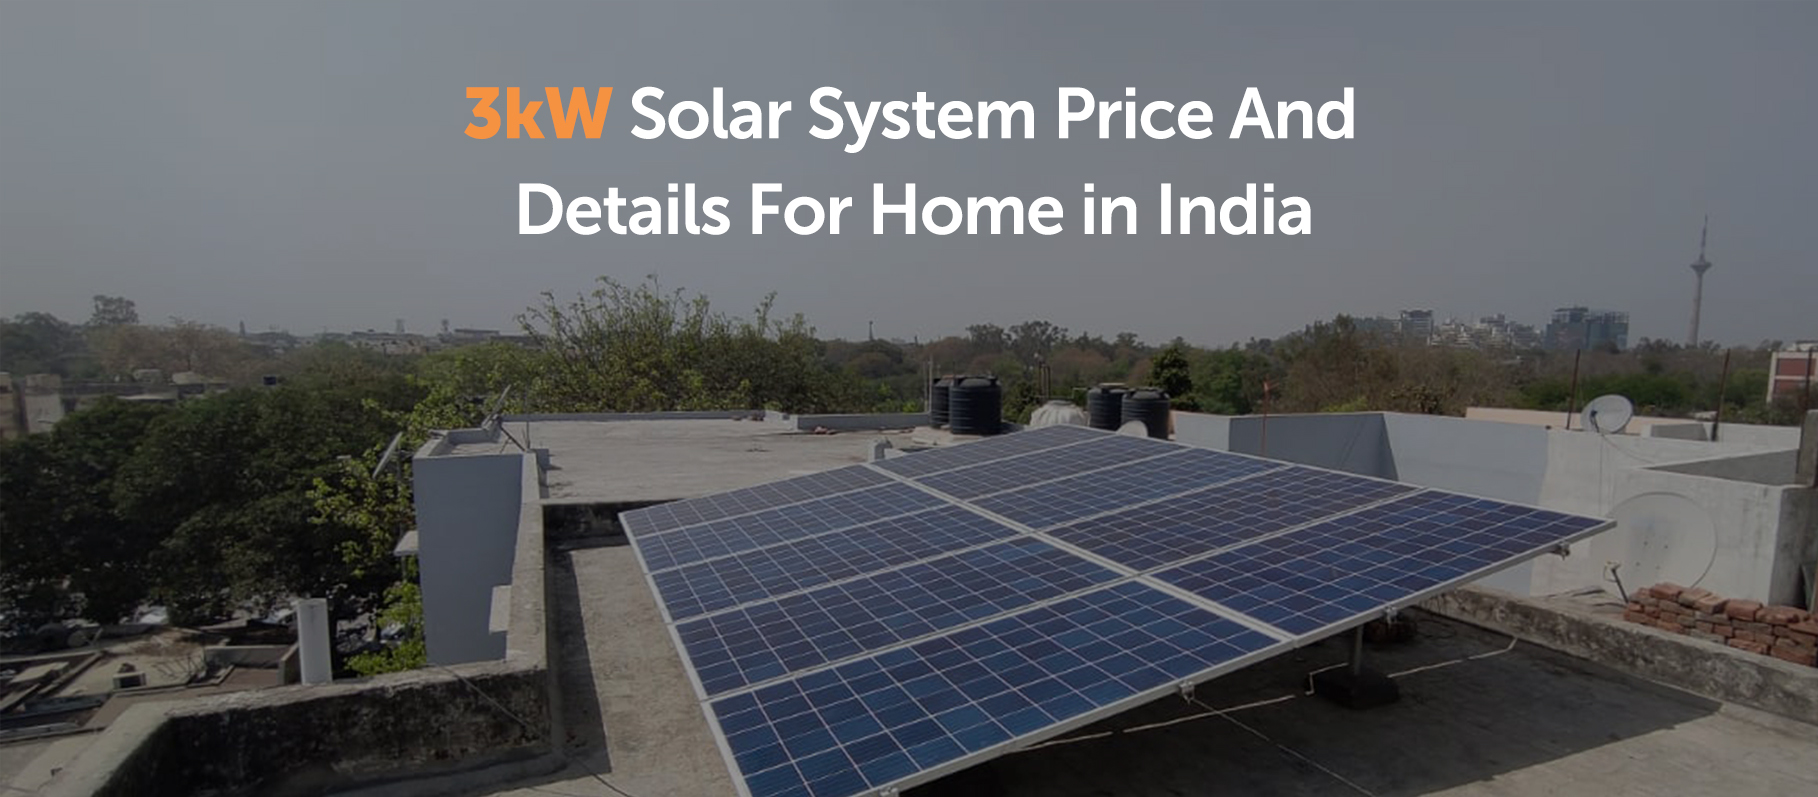 3kW Solar System Price And Details For Home In India